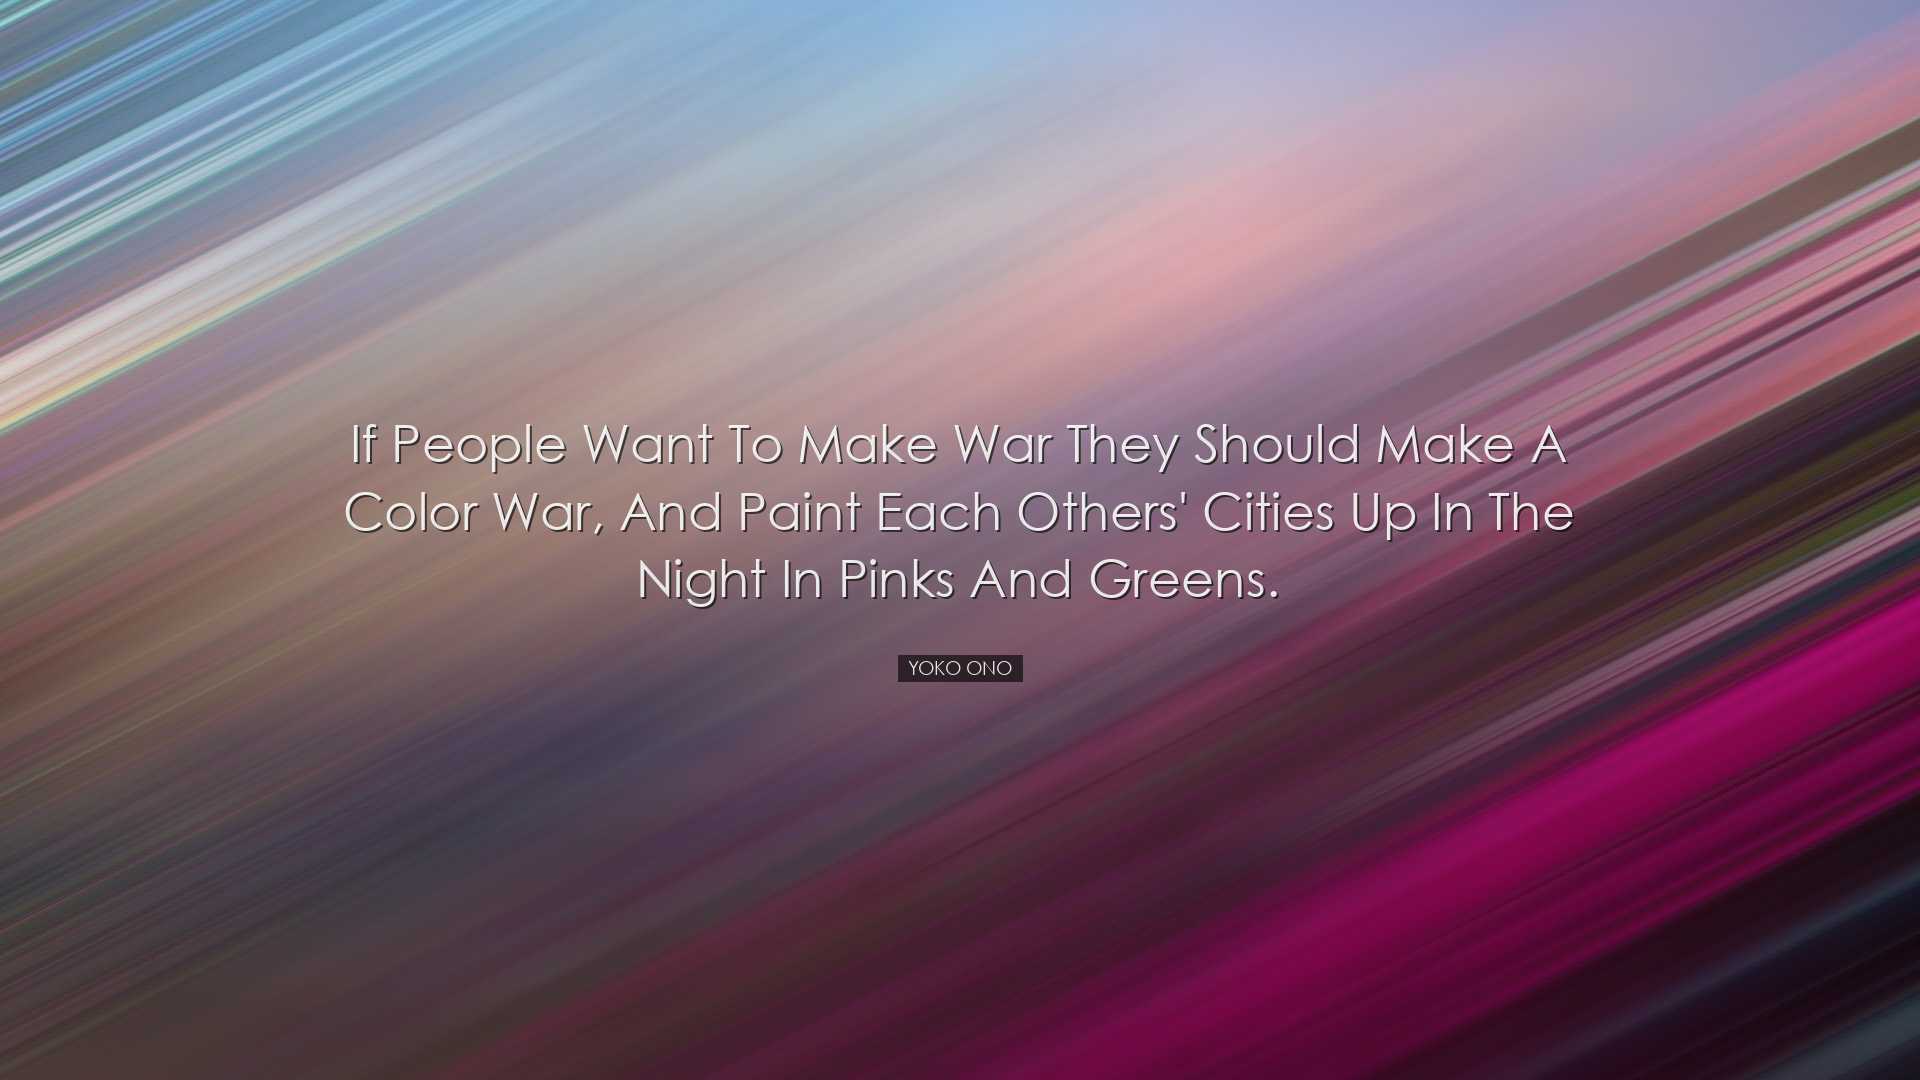 If people want to make war they should make a color war, and paint